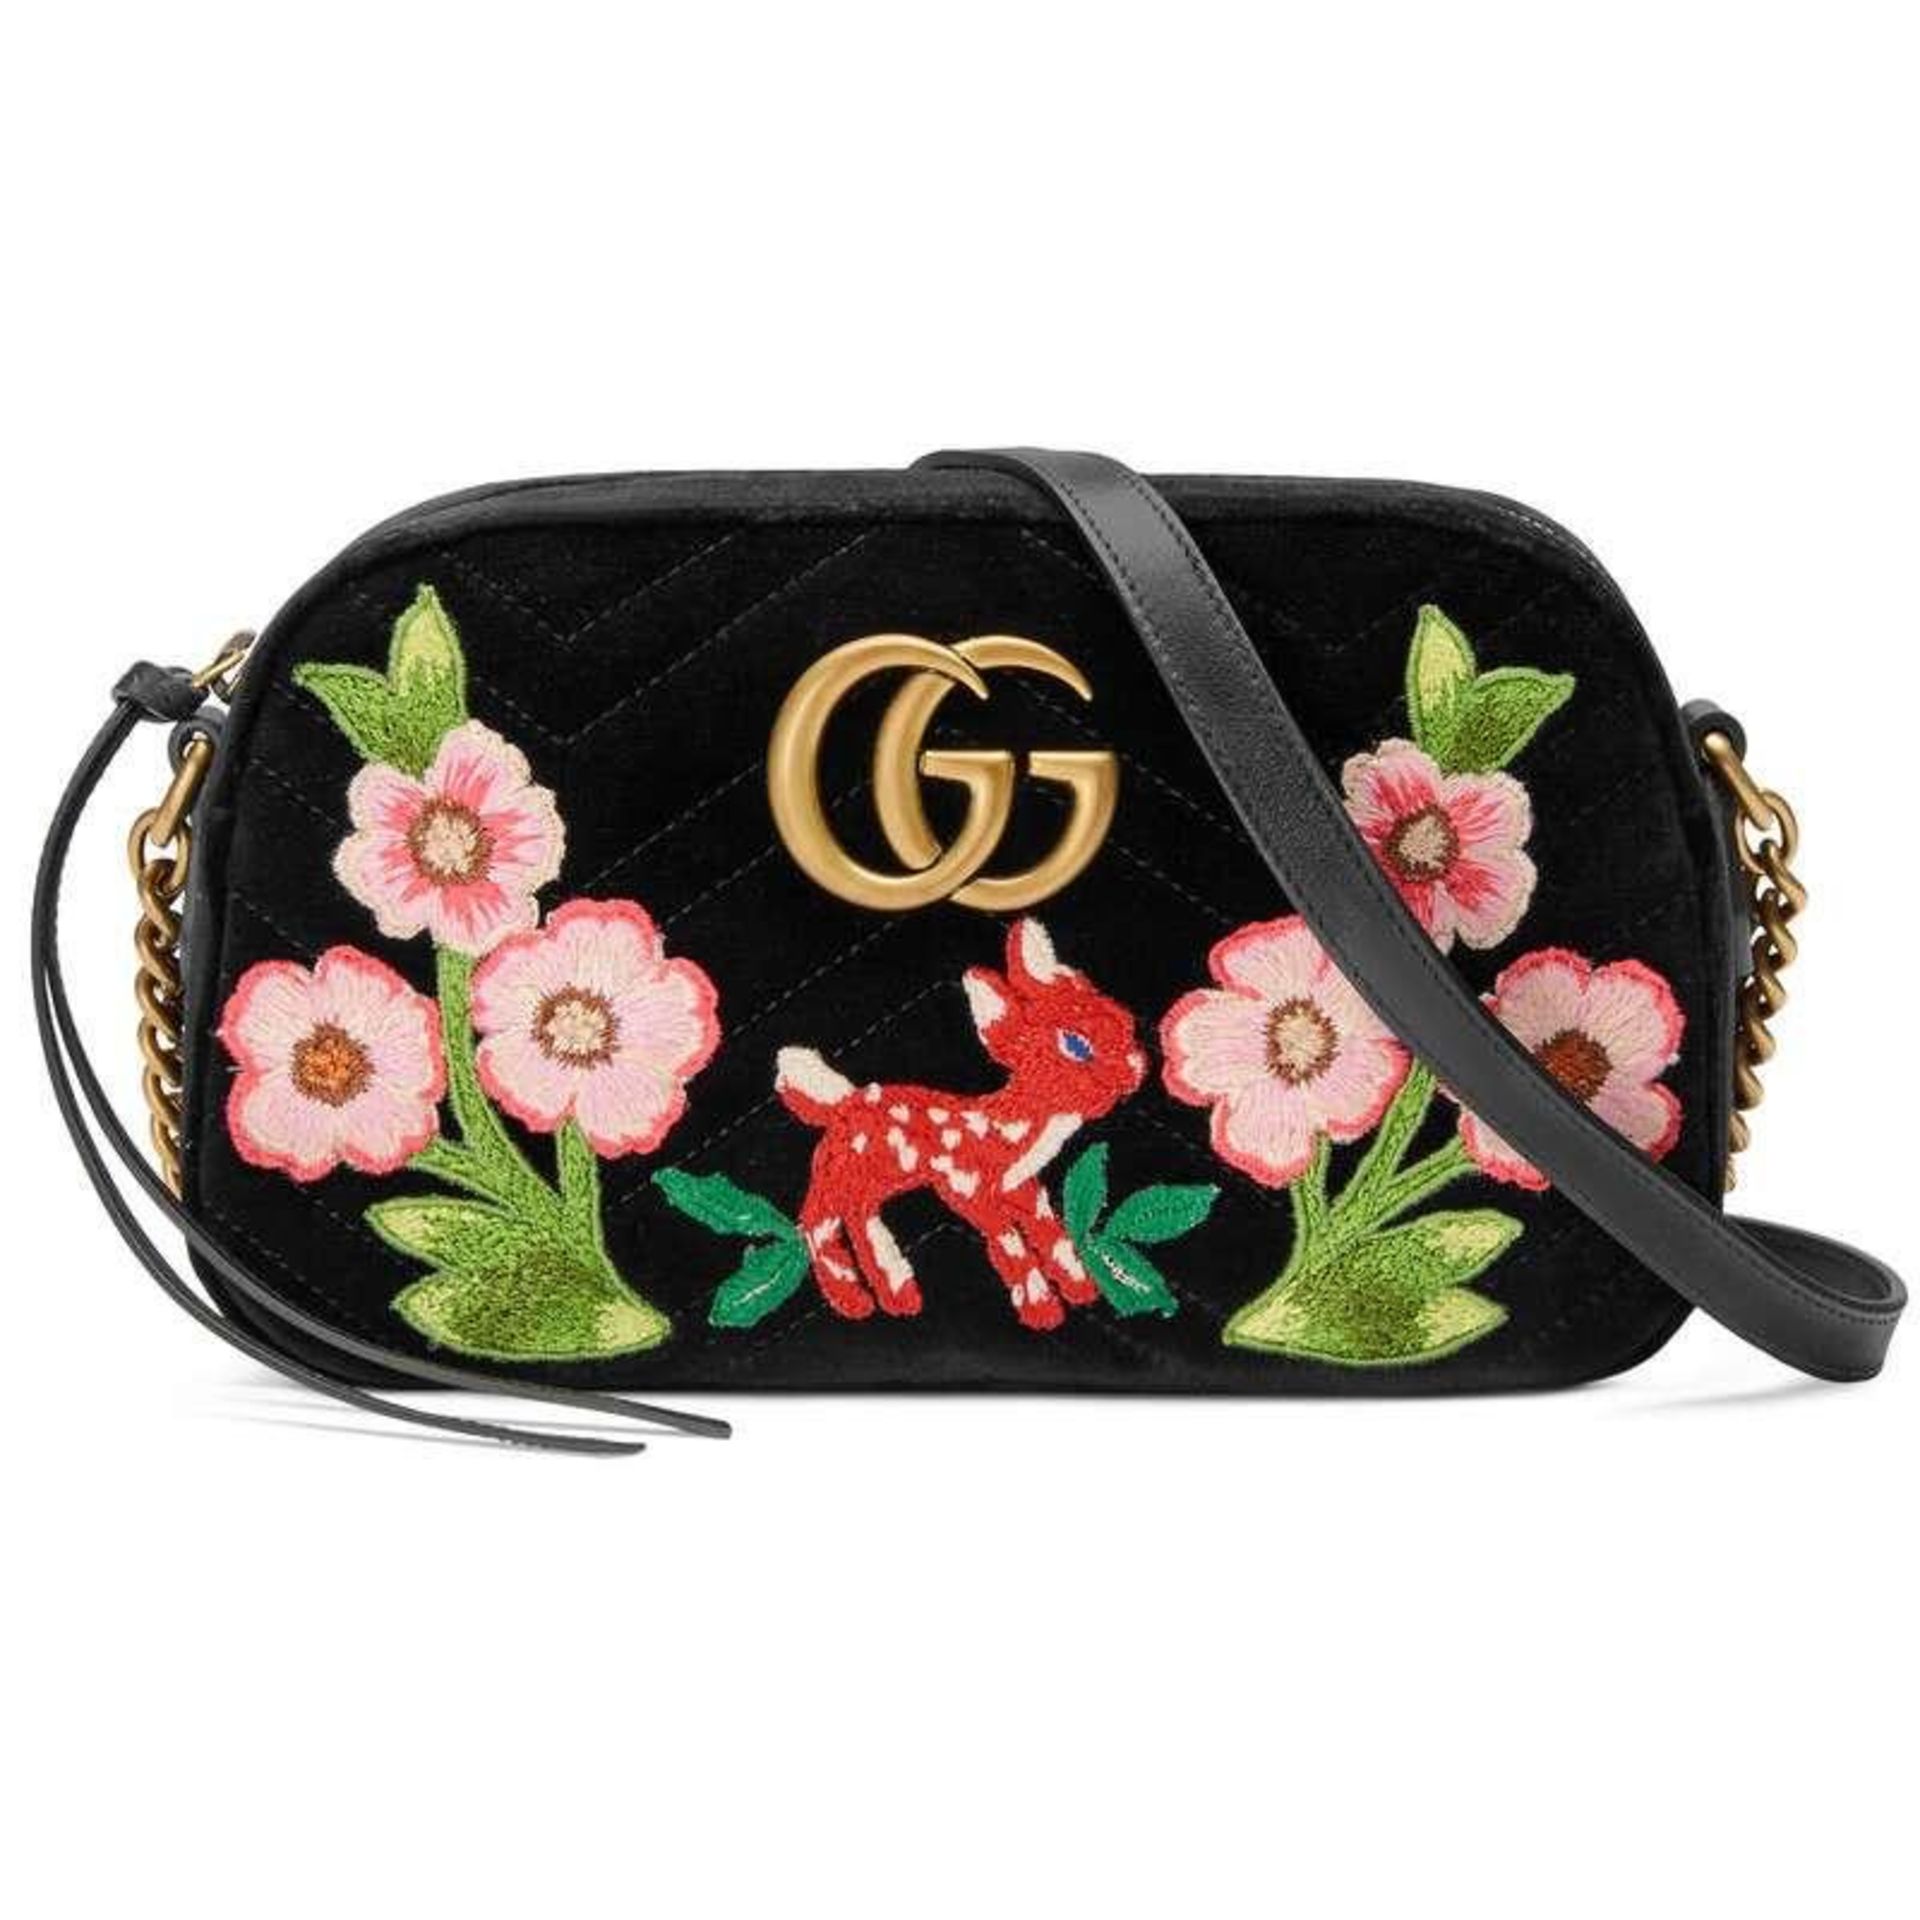 "Marmont Bambi" - Gucci bag, quilted velvet, black, decorated with embroidered flora and fauna eleme